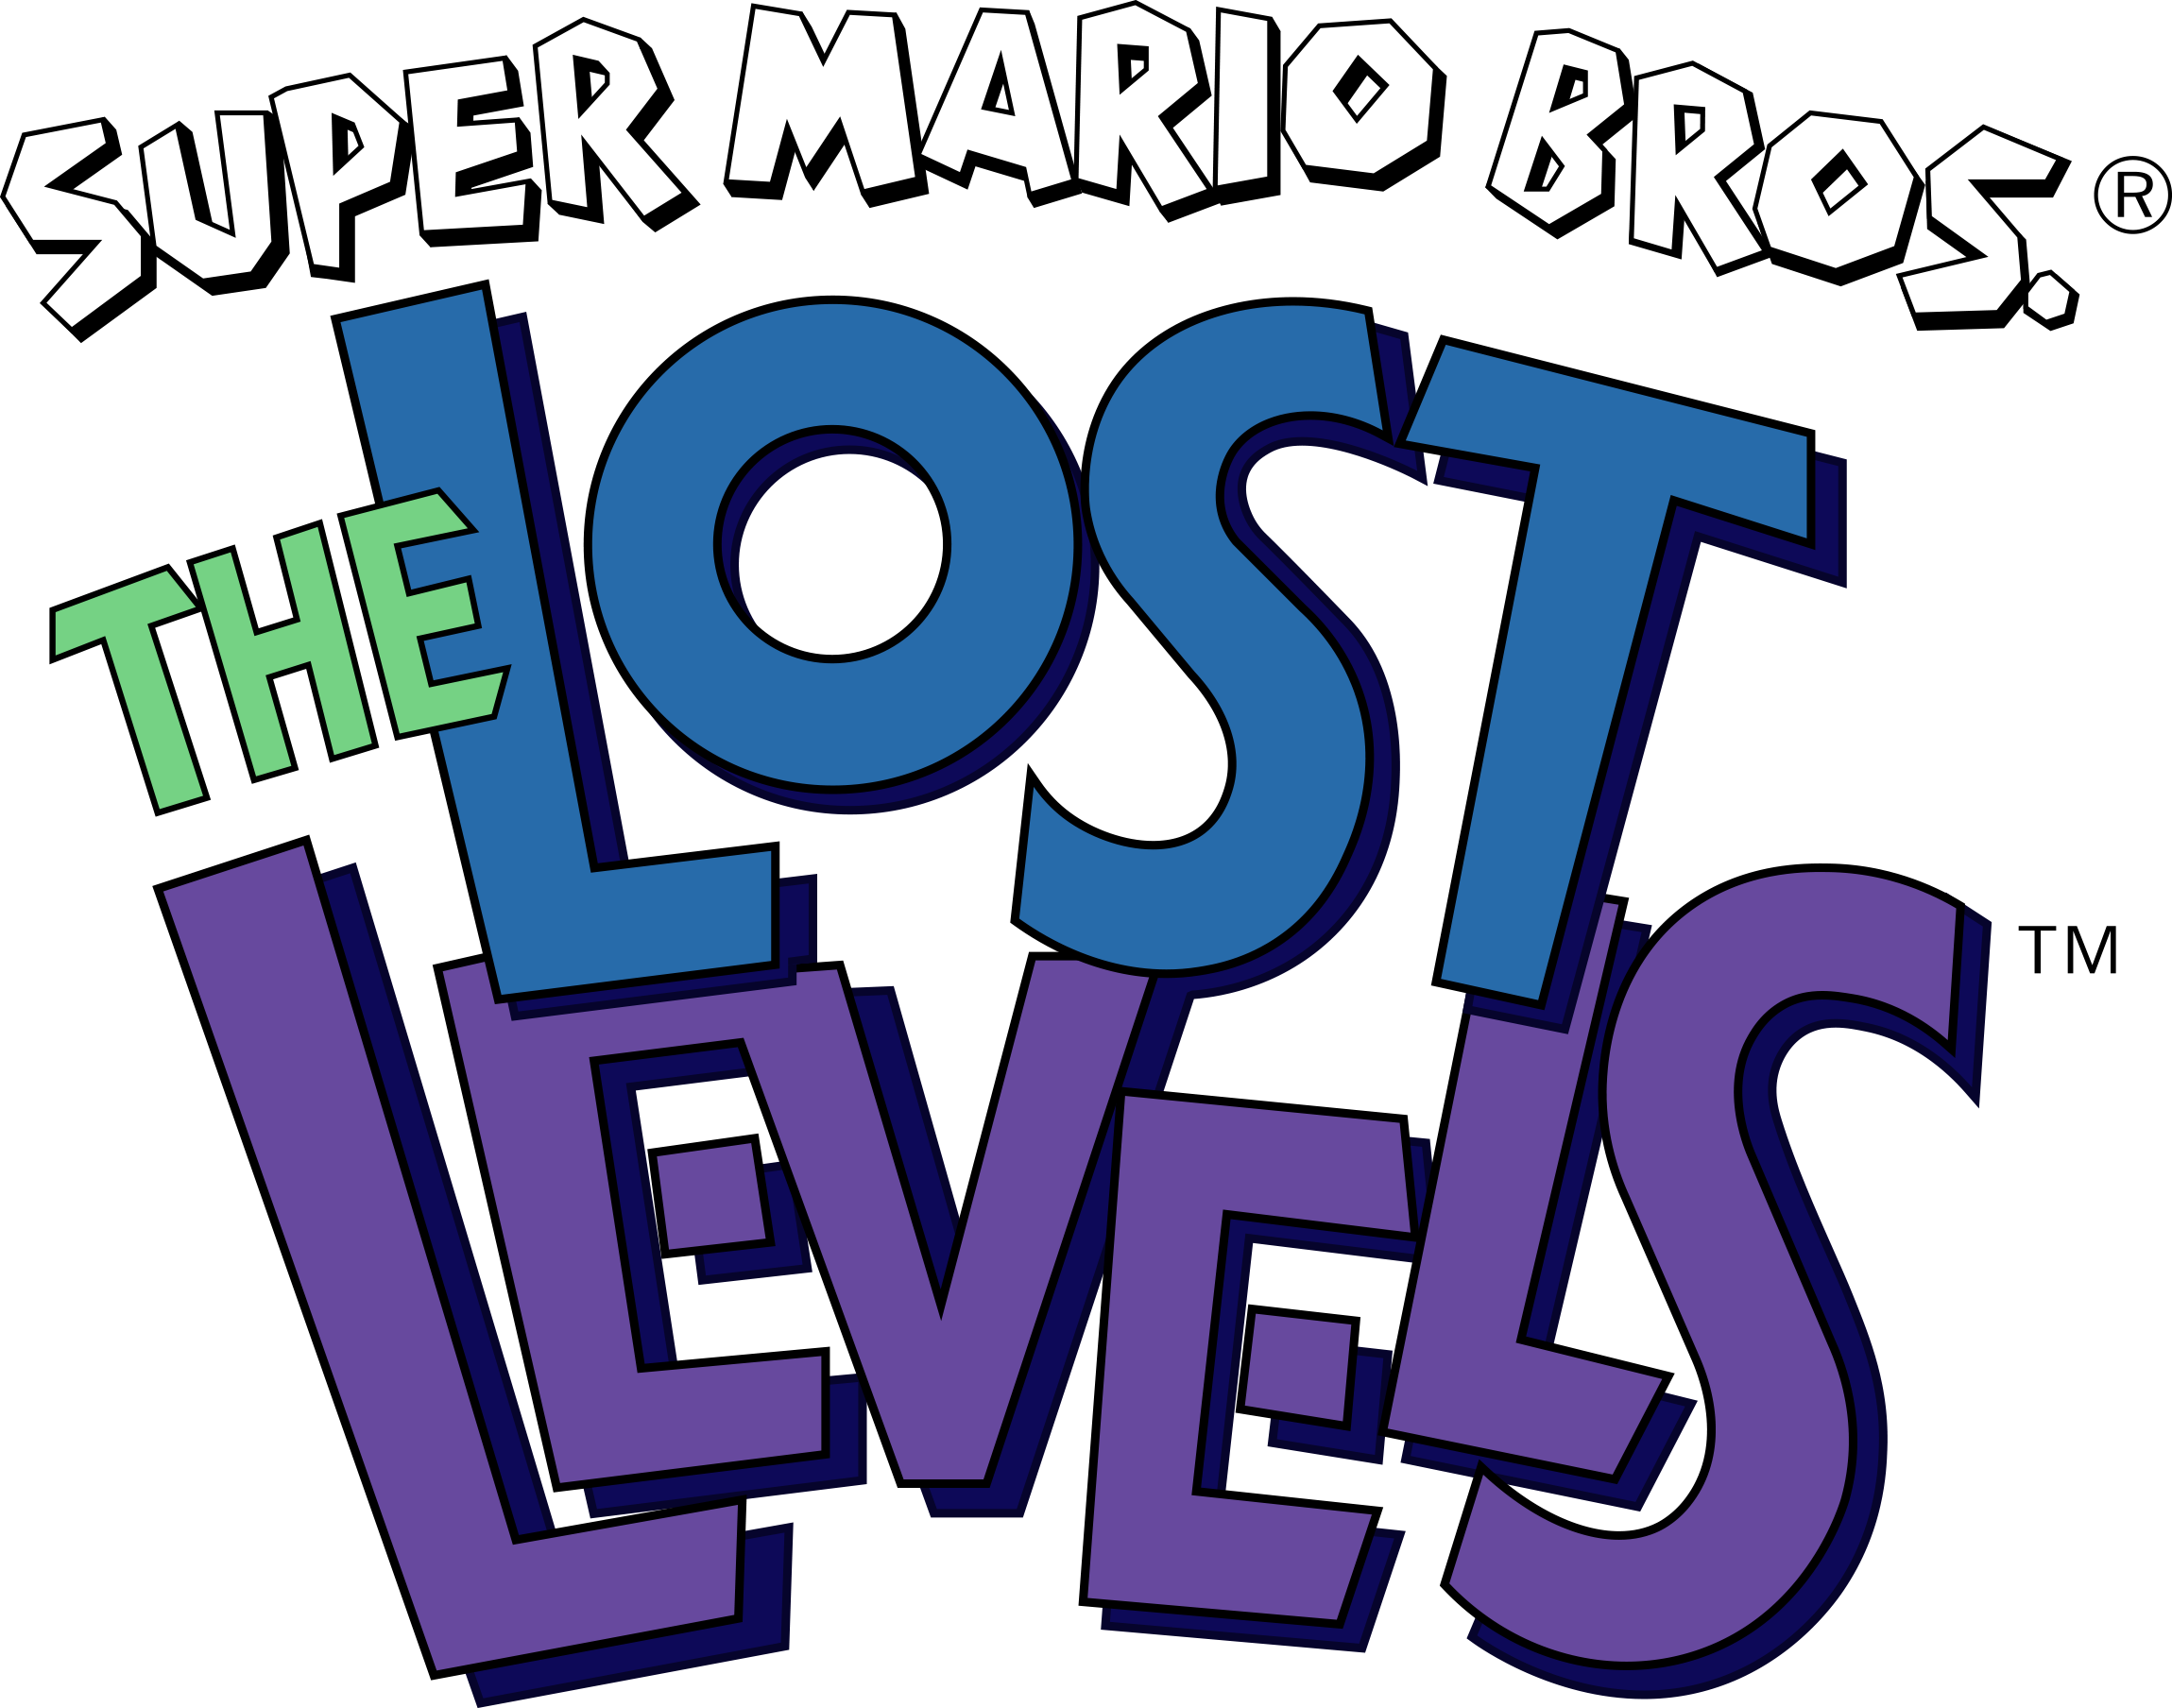 gow to secret levels in world 6 new super mario bros 2